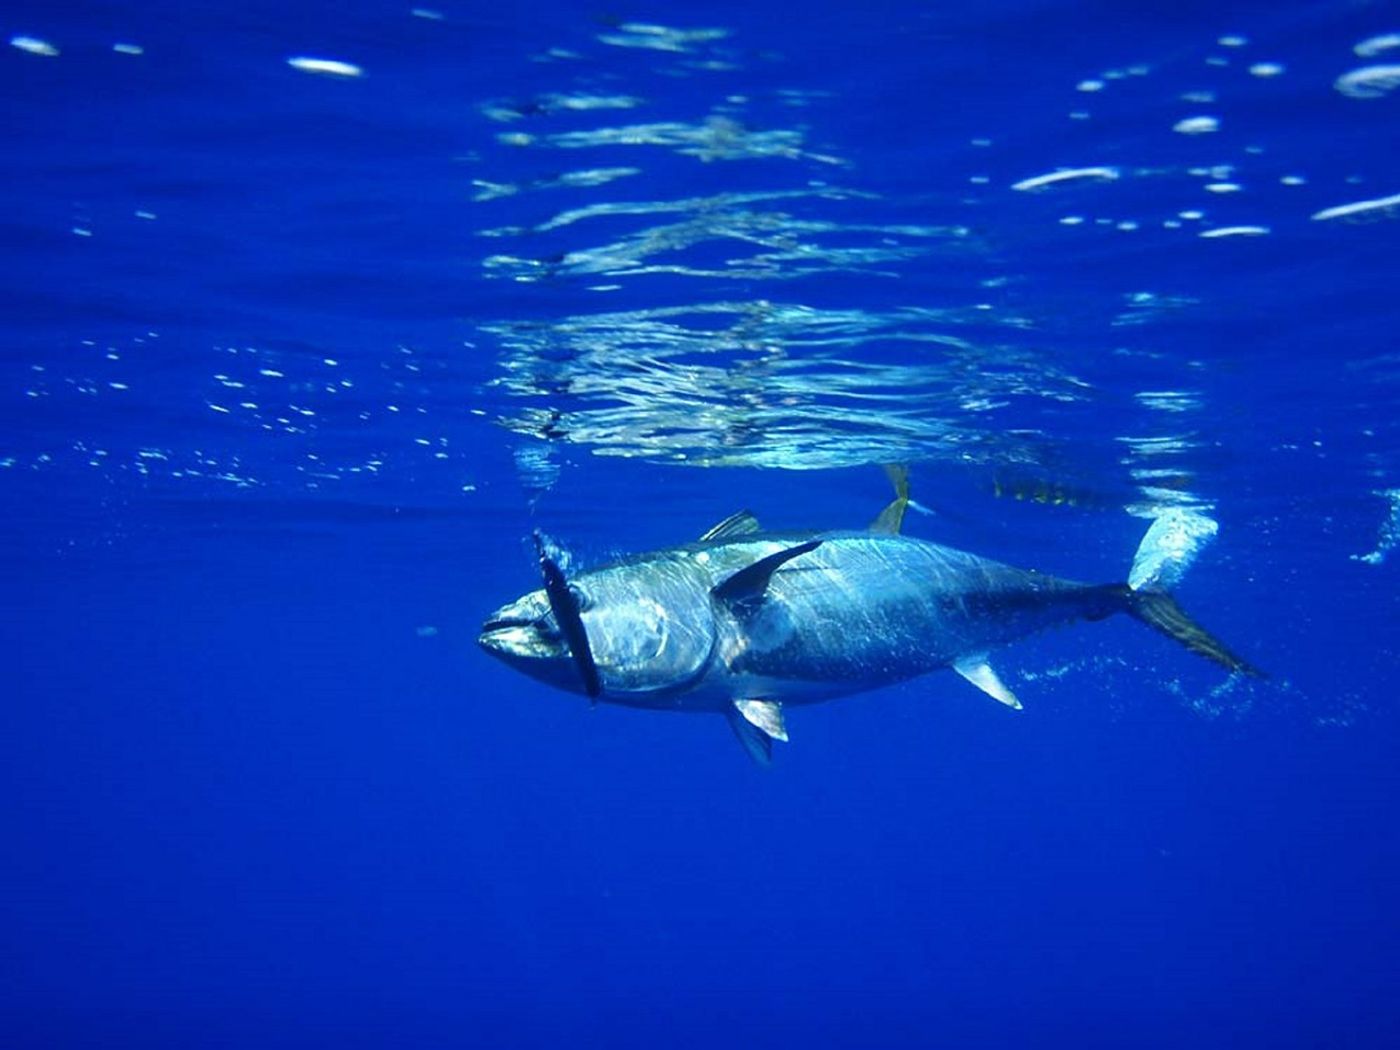 Bluefin tuna take advantage of internal biological hydraulic systems to ensure optimal control and stability while swimming at various speeds.